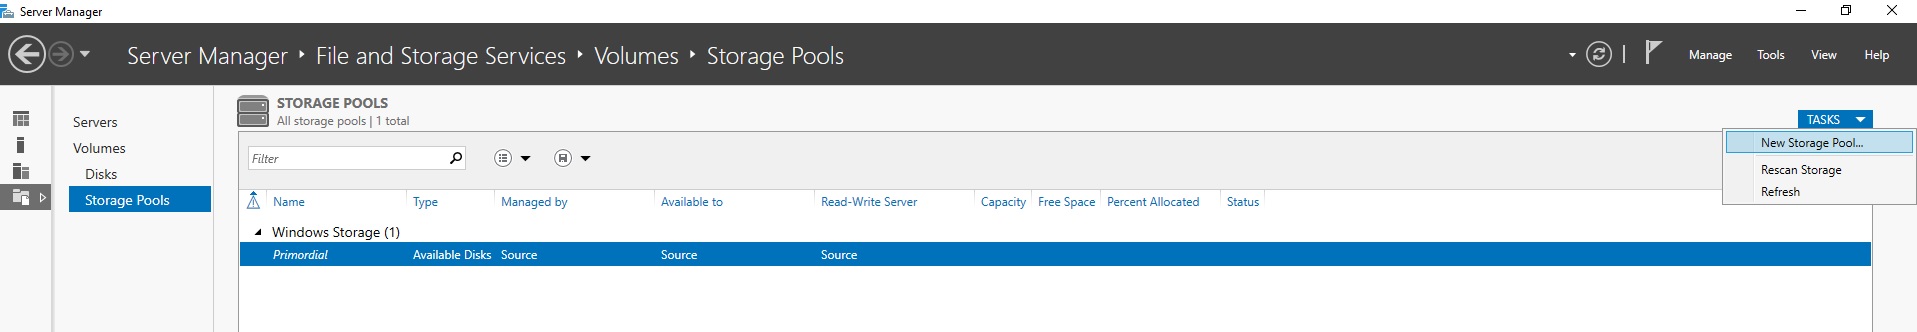 Adding a new Storage Pool to your VM